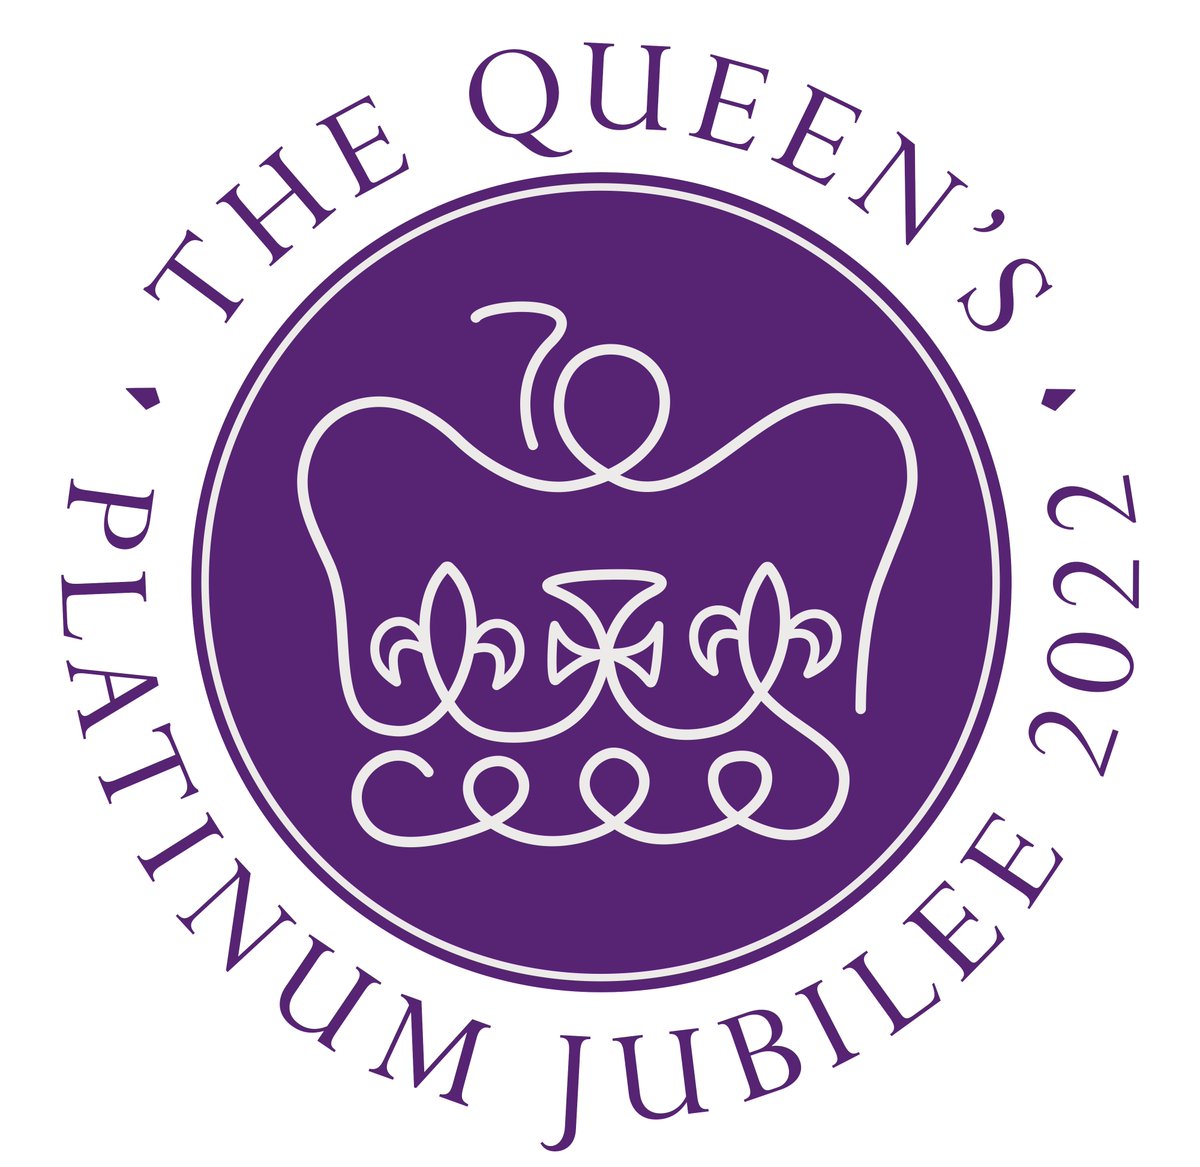 Wishing a wonderful #PlatinumJubilee weekend to all our #localgov colleagues!